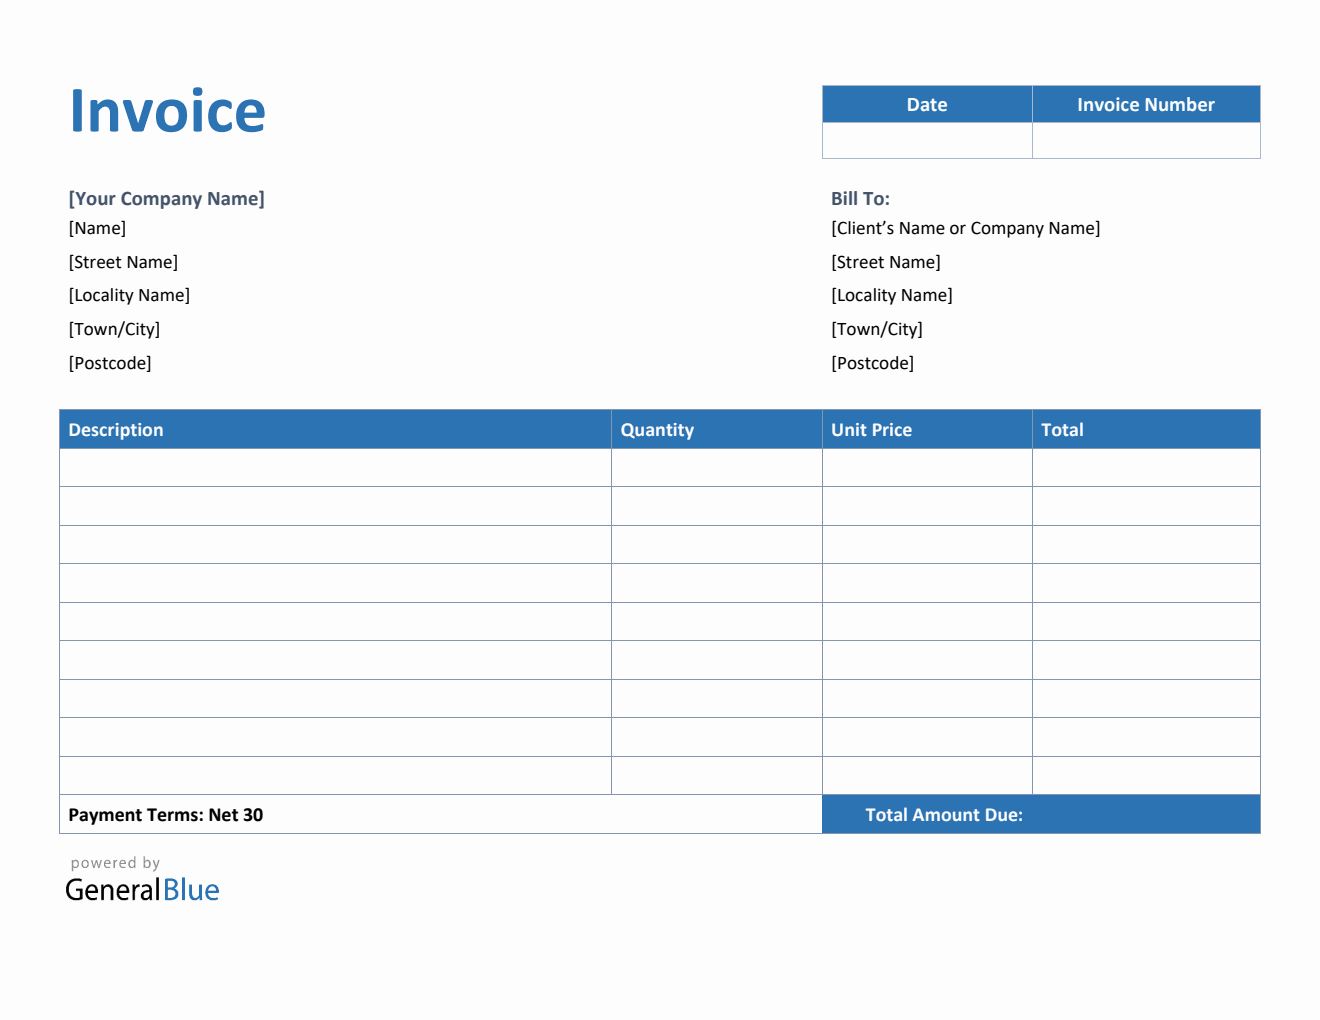 Invoice Template for U.K. in Word (Blue)